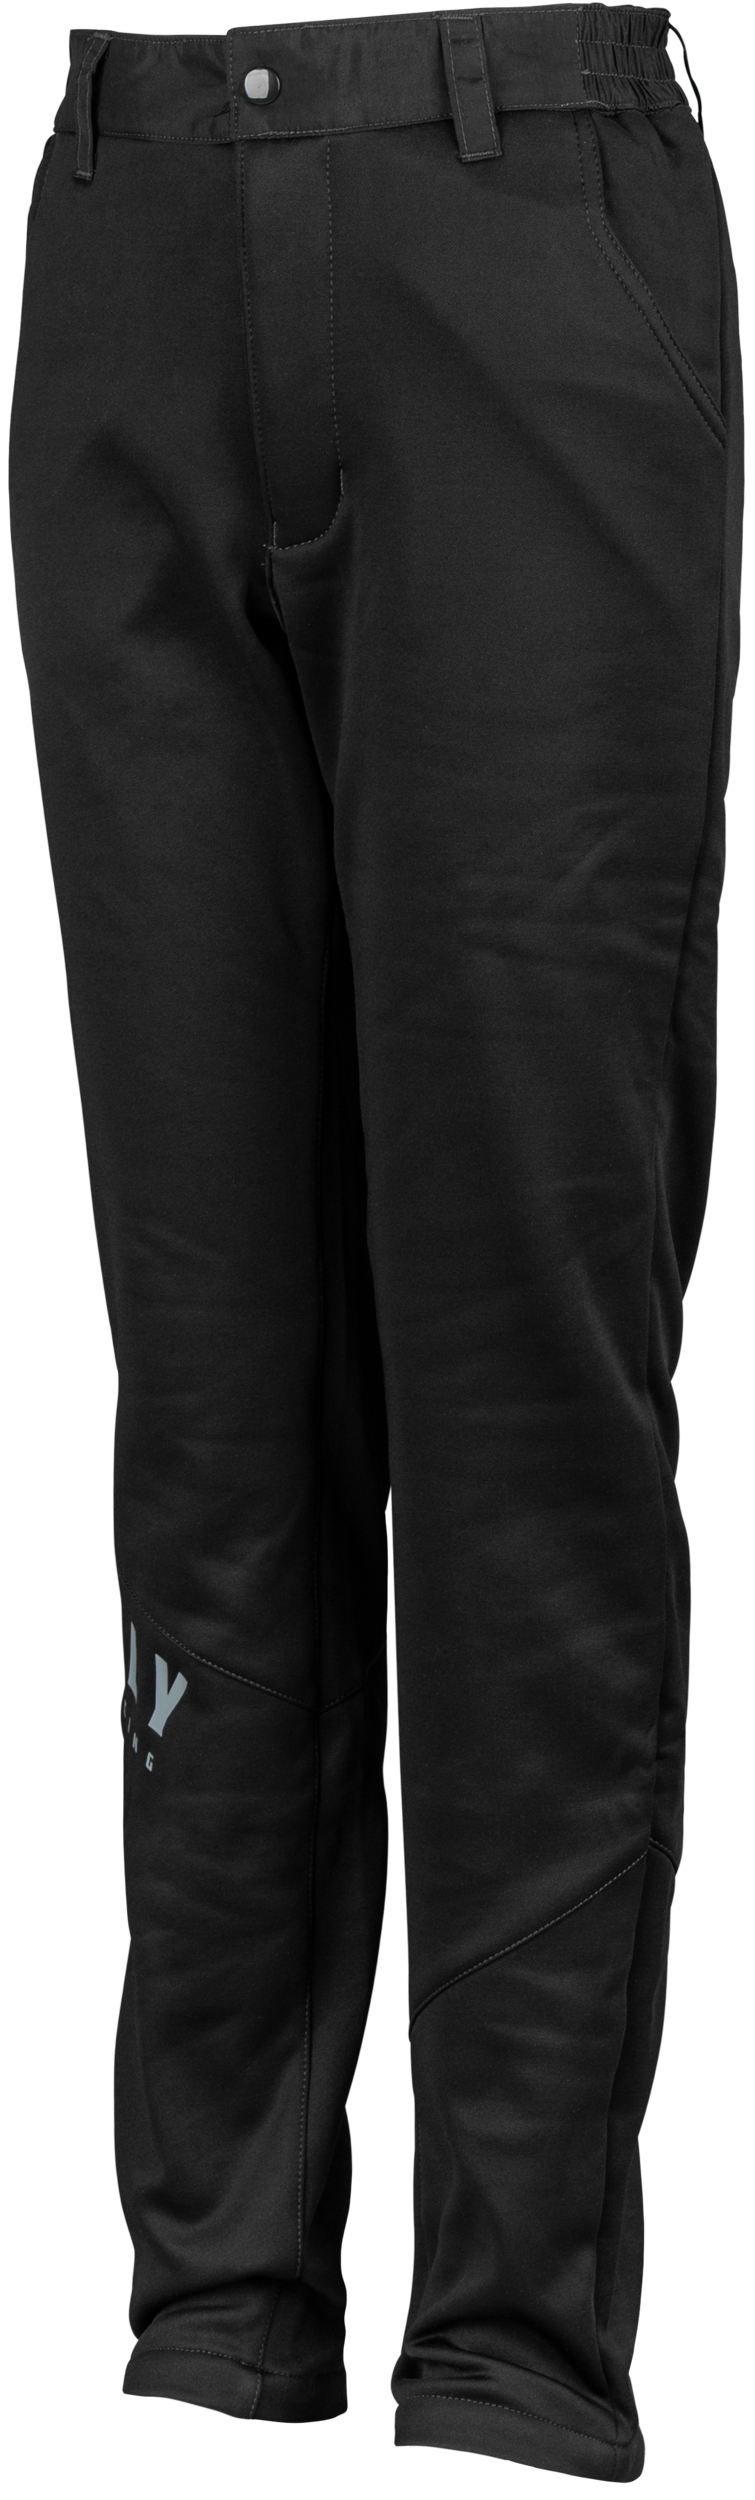 FLY RACING Women's Mid-Layer Pants Black Md 354-6347M